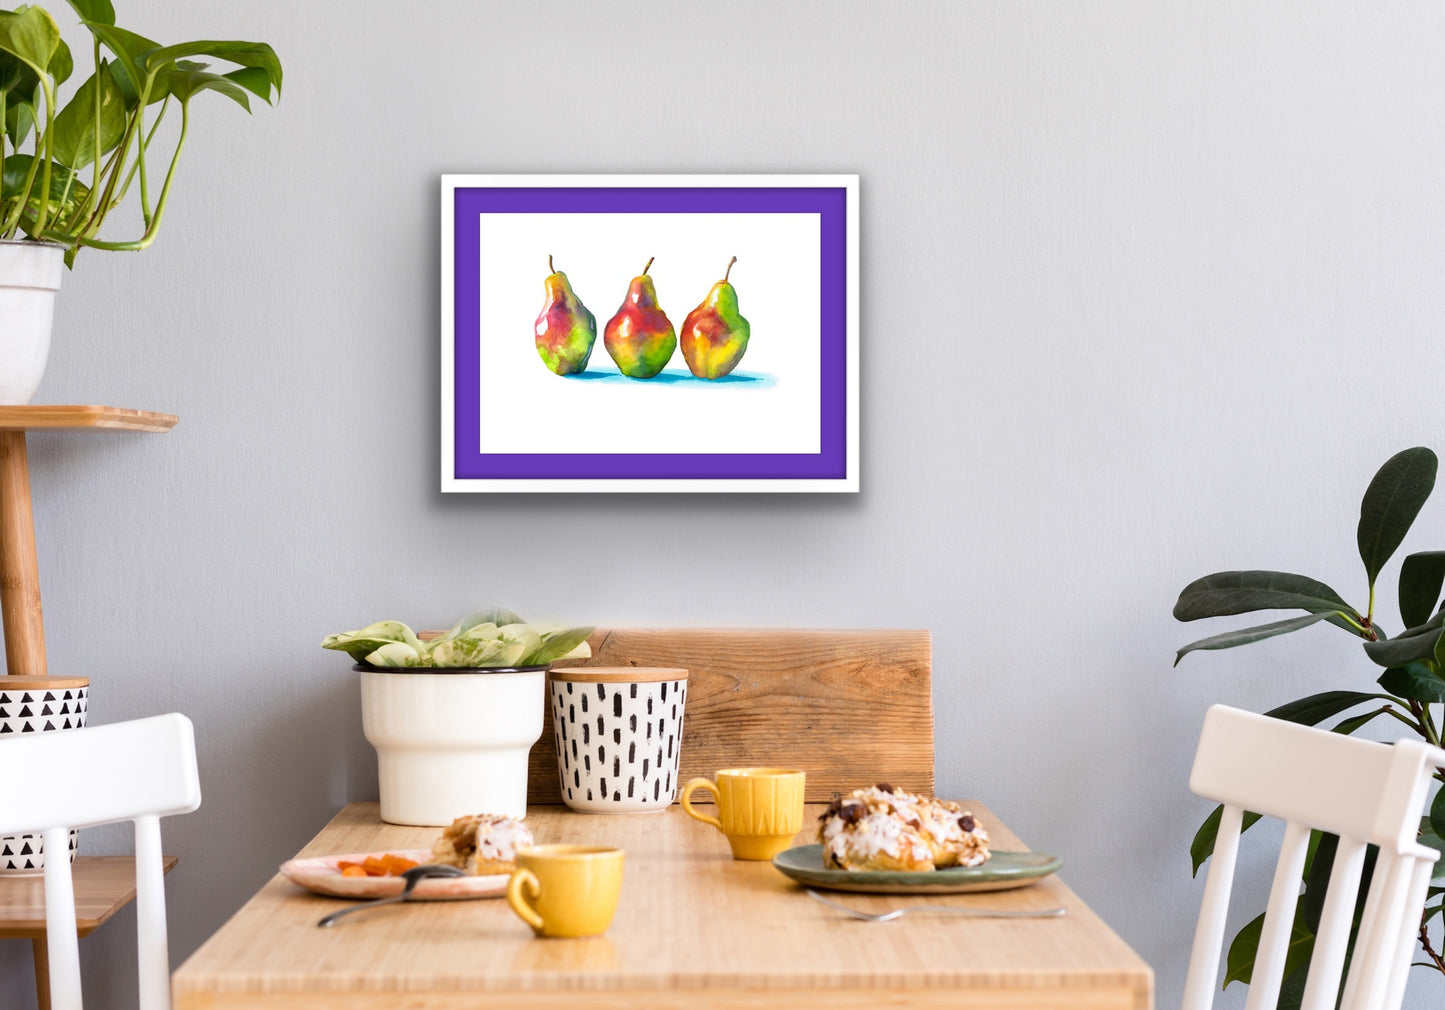 Trio of Pears, Fine Art Giclee Limited Edition Print